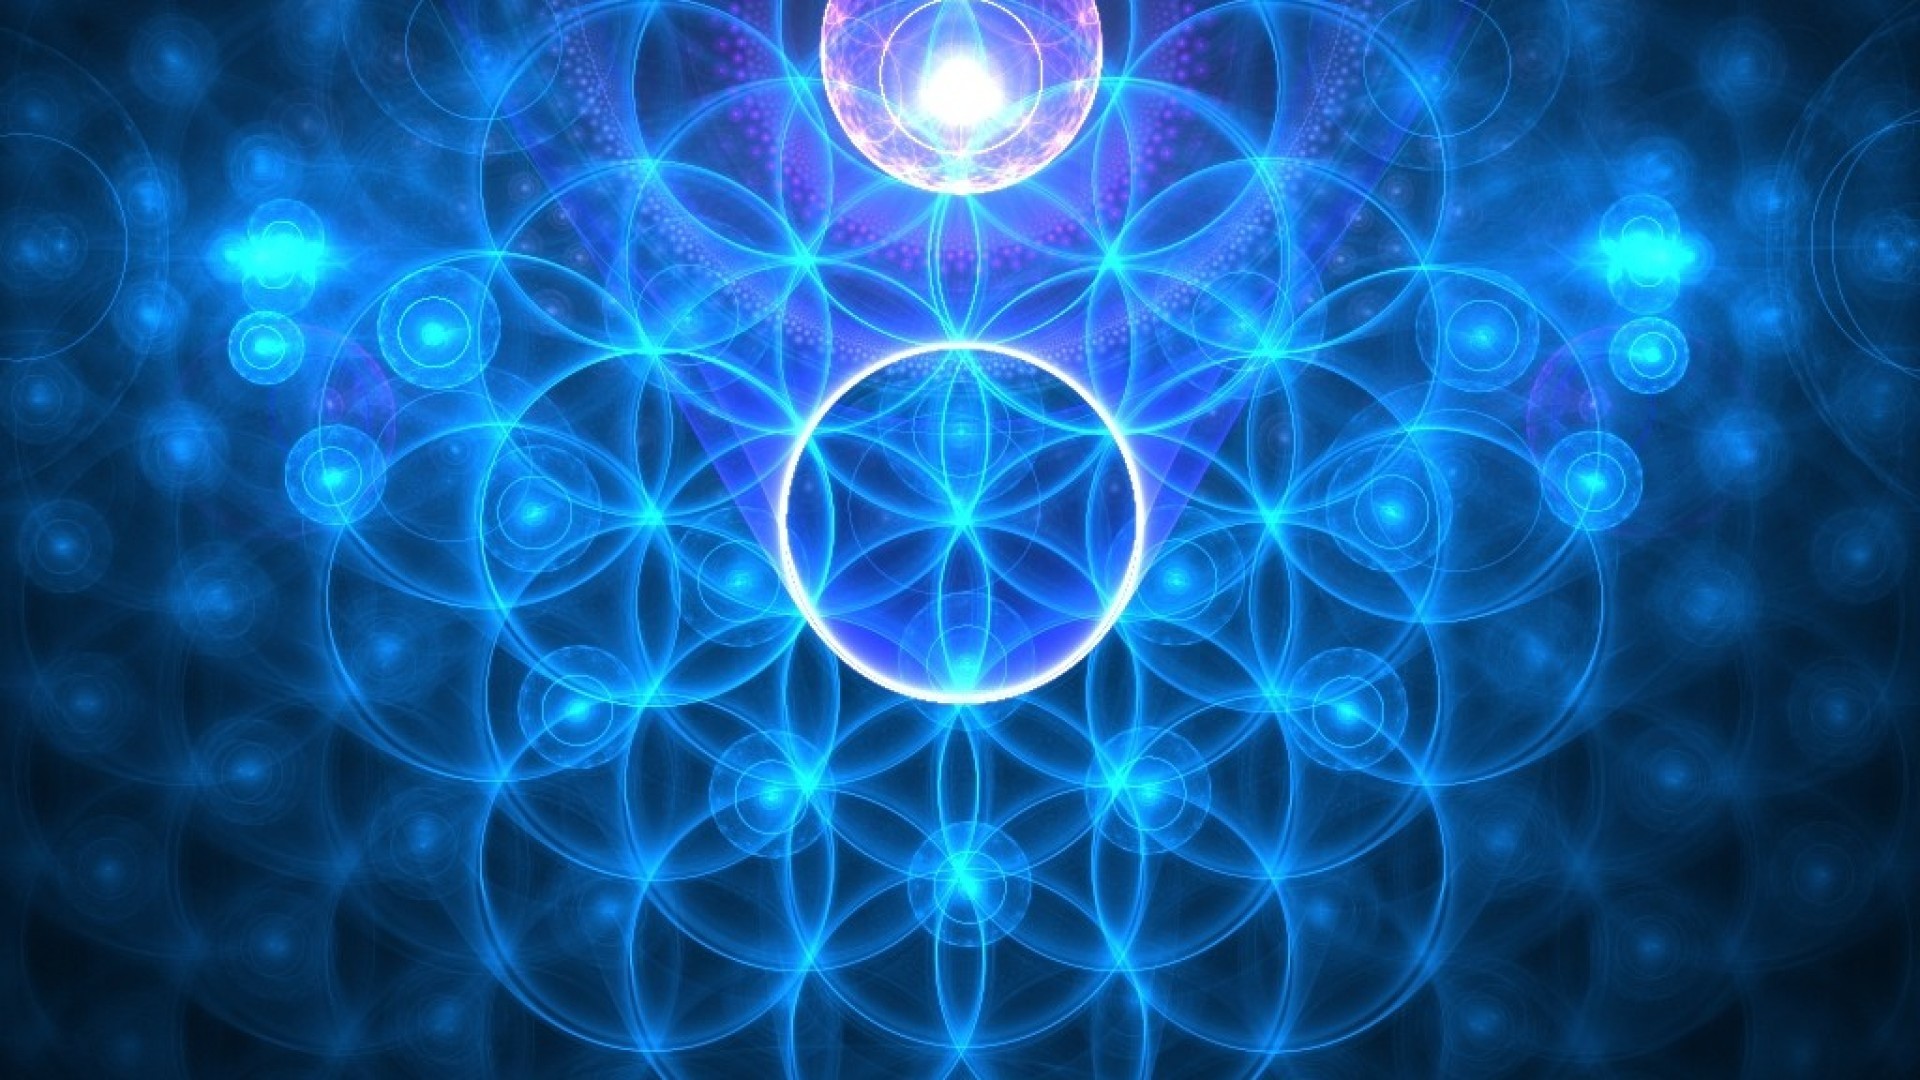 Flower of Life Wallpapers (64+ images)